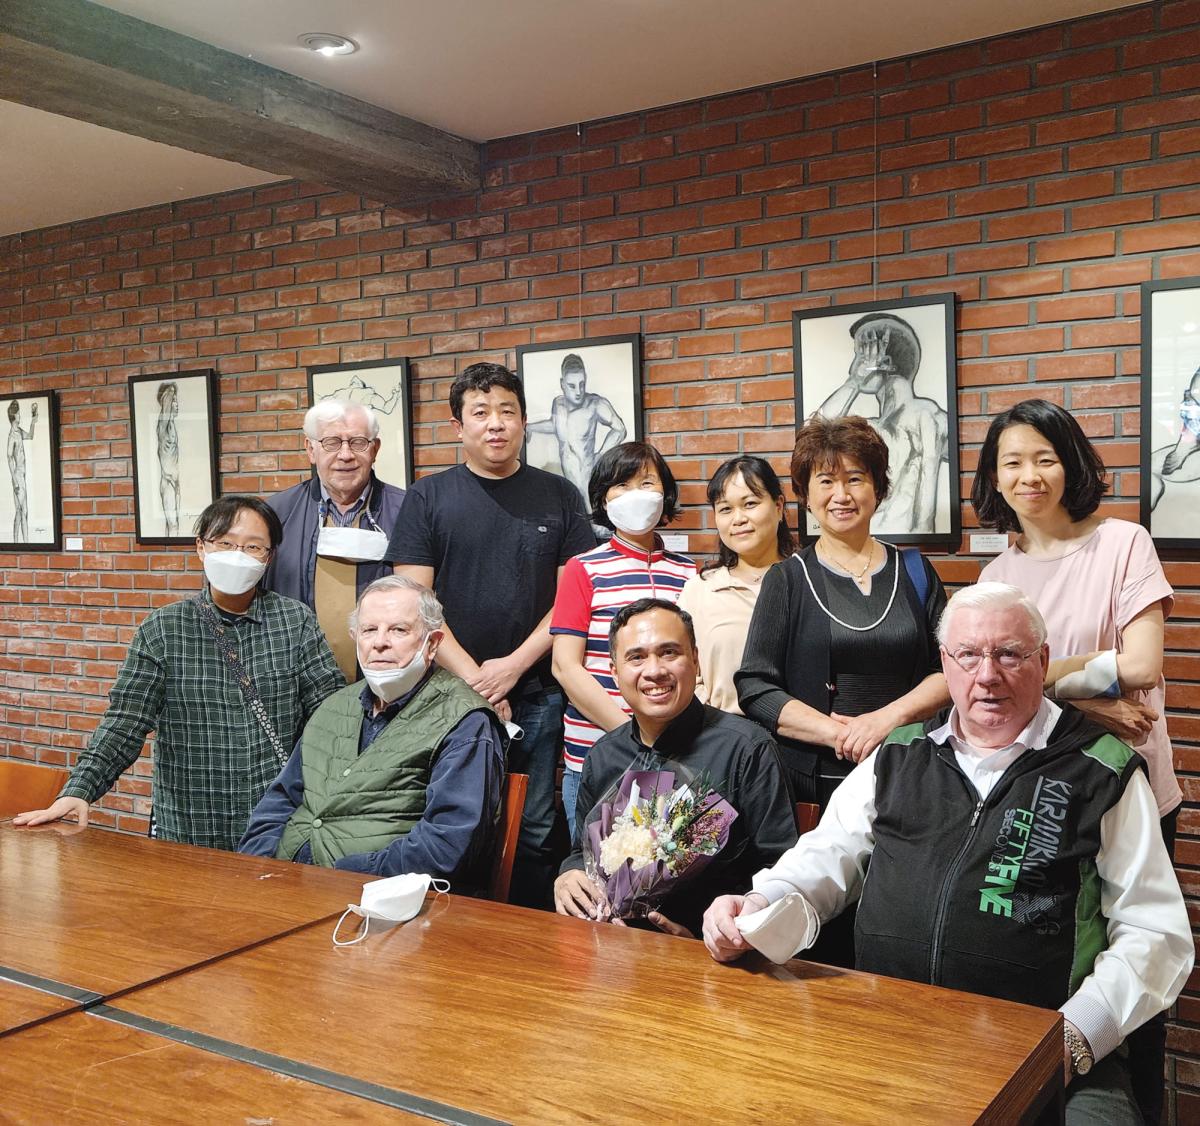 Columban priests and co-workers gather at the exhibition of art work by Fr Jason Antiquera (front centre), Seoul, Korea. - Photo: St Columbans Mission Society